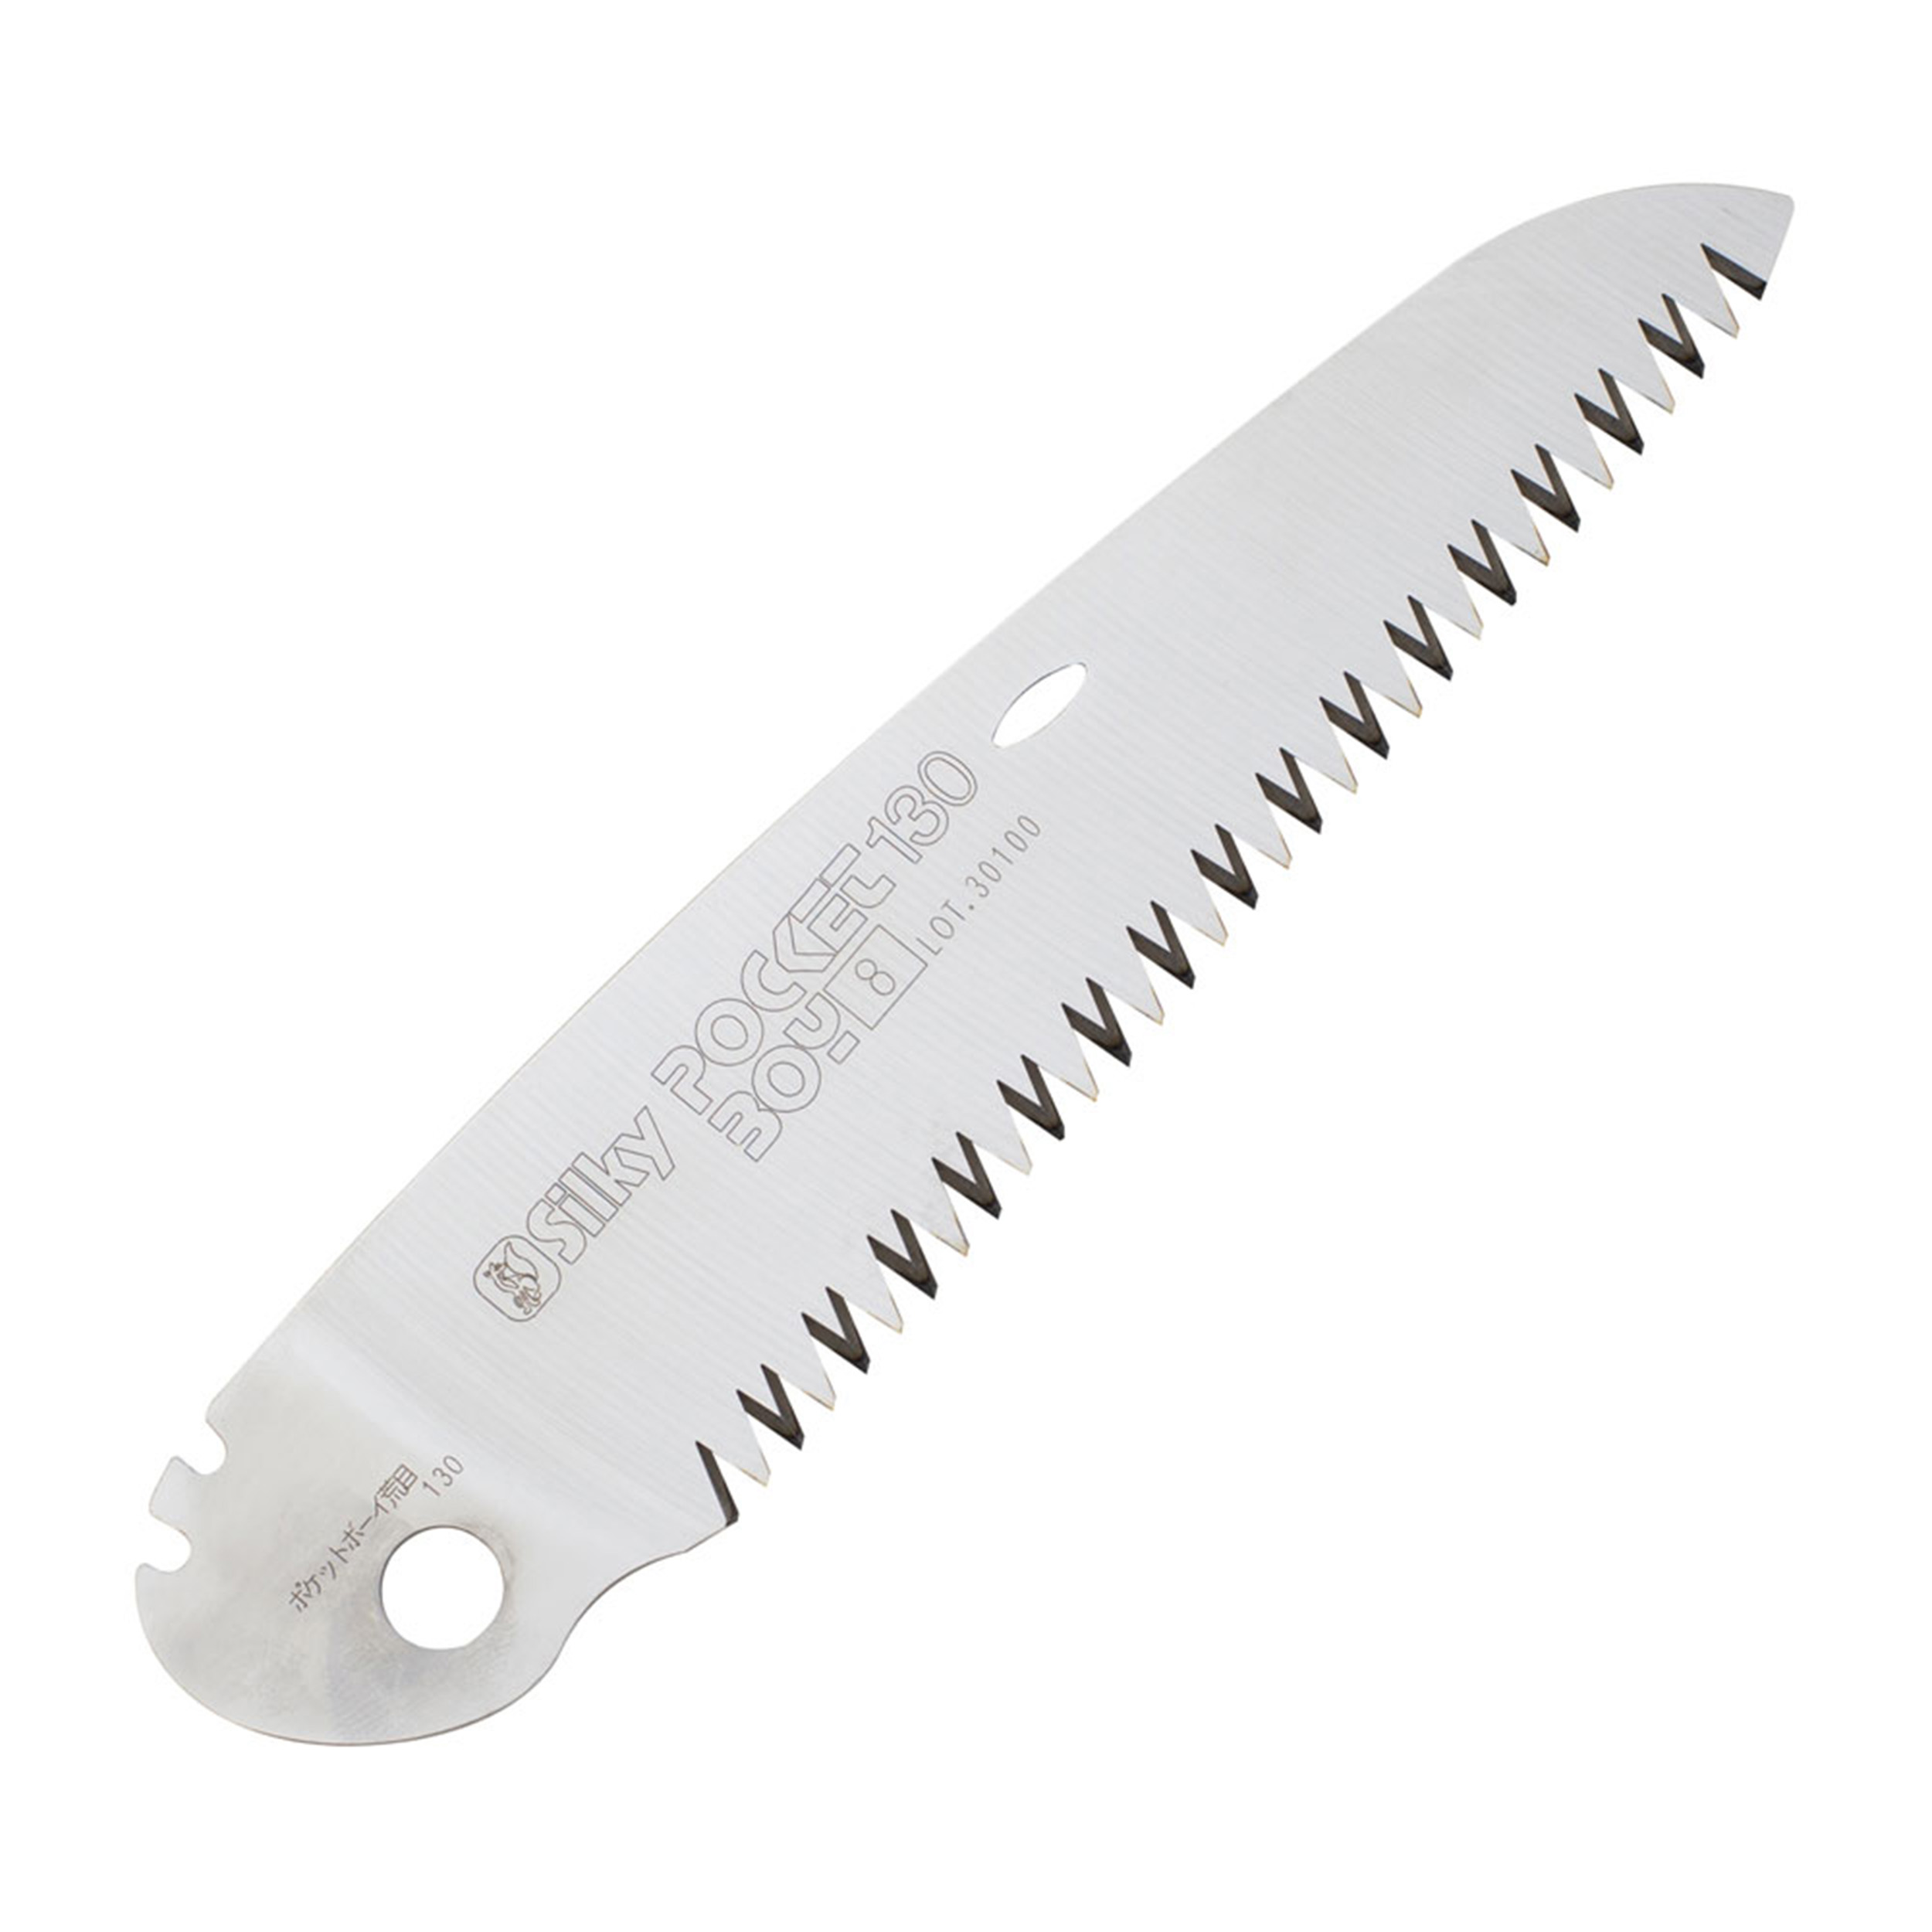 Pocketboy Replacement Blade, 130mm, Large Teeth